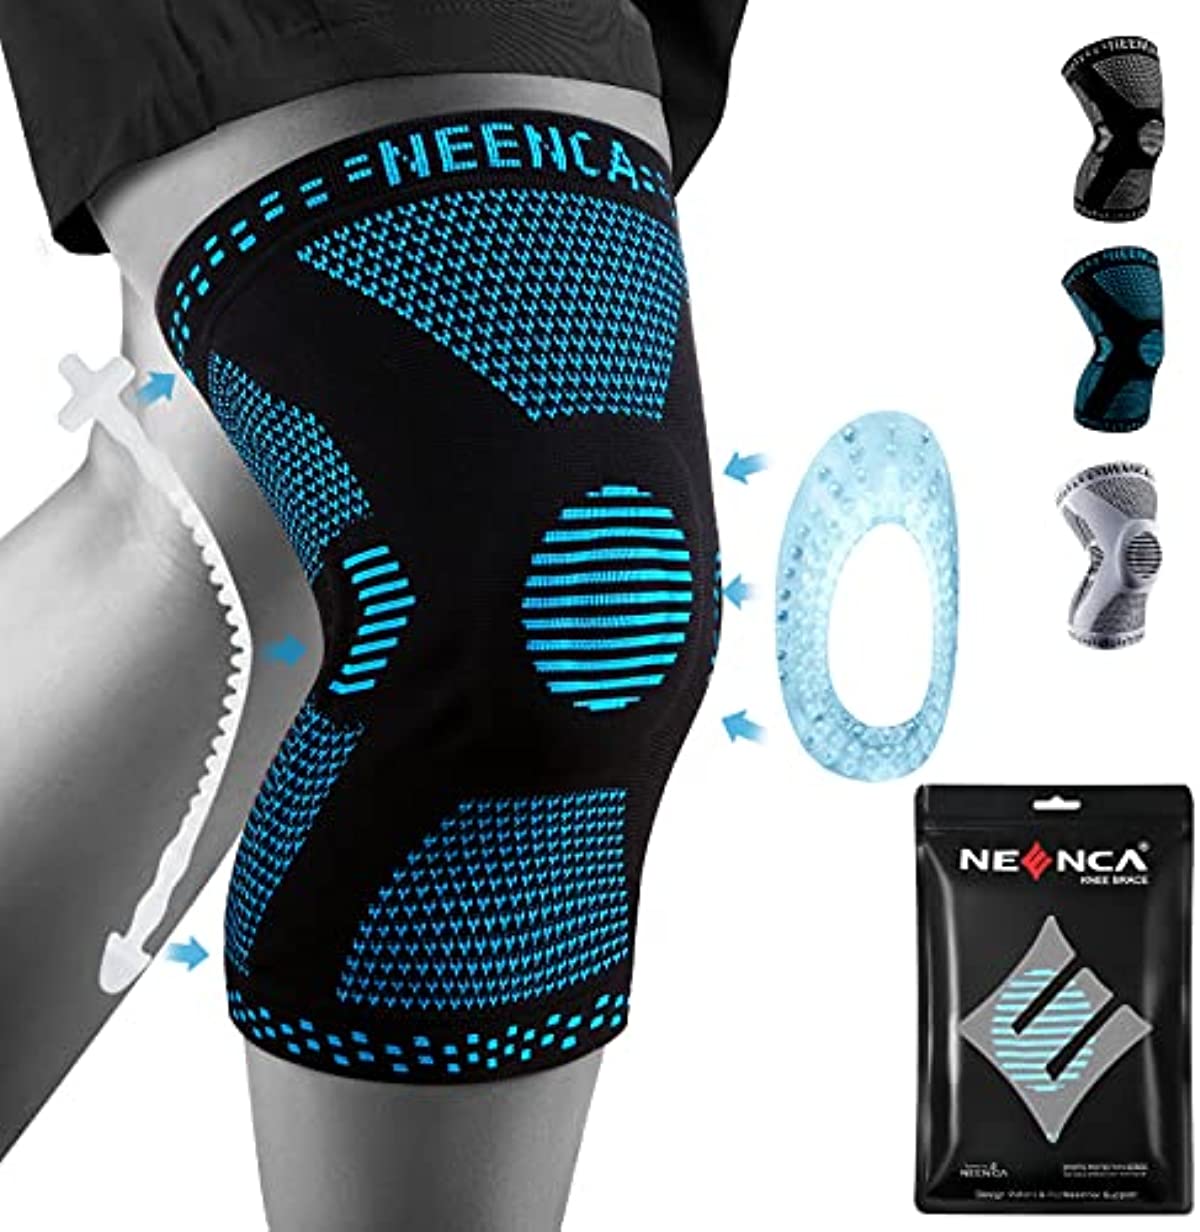 NEENCA Professional Plus Size Knee Brace, Knee Compression Sleeve for Larger Legs and Bigger Thighs, Medical Knee Support for Knee Pain Relief, Injury Recovery, Sports Protection, Single(2XL-5XL) (Blue, 2XL)